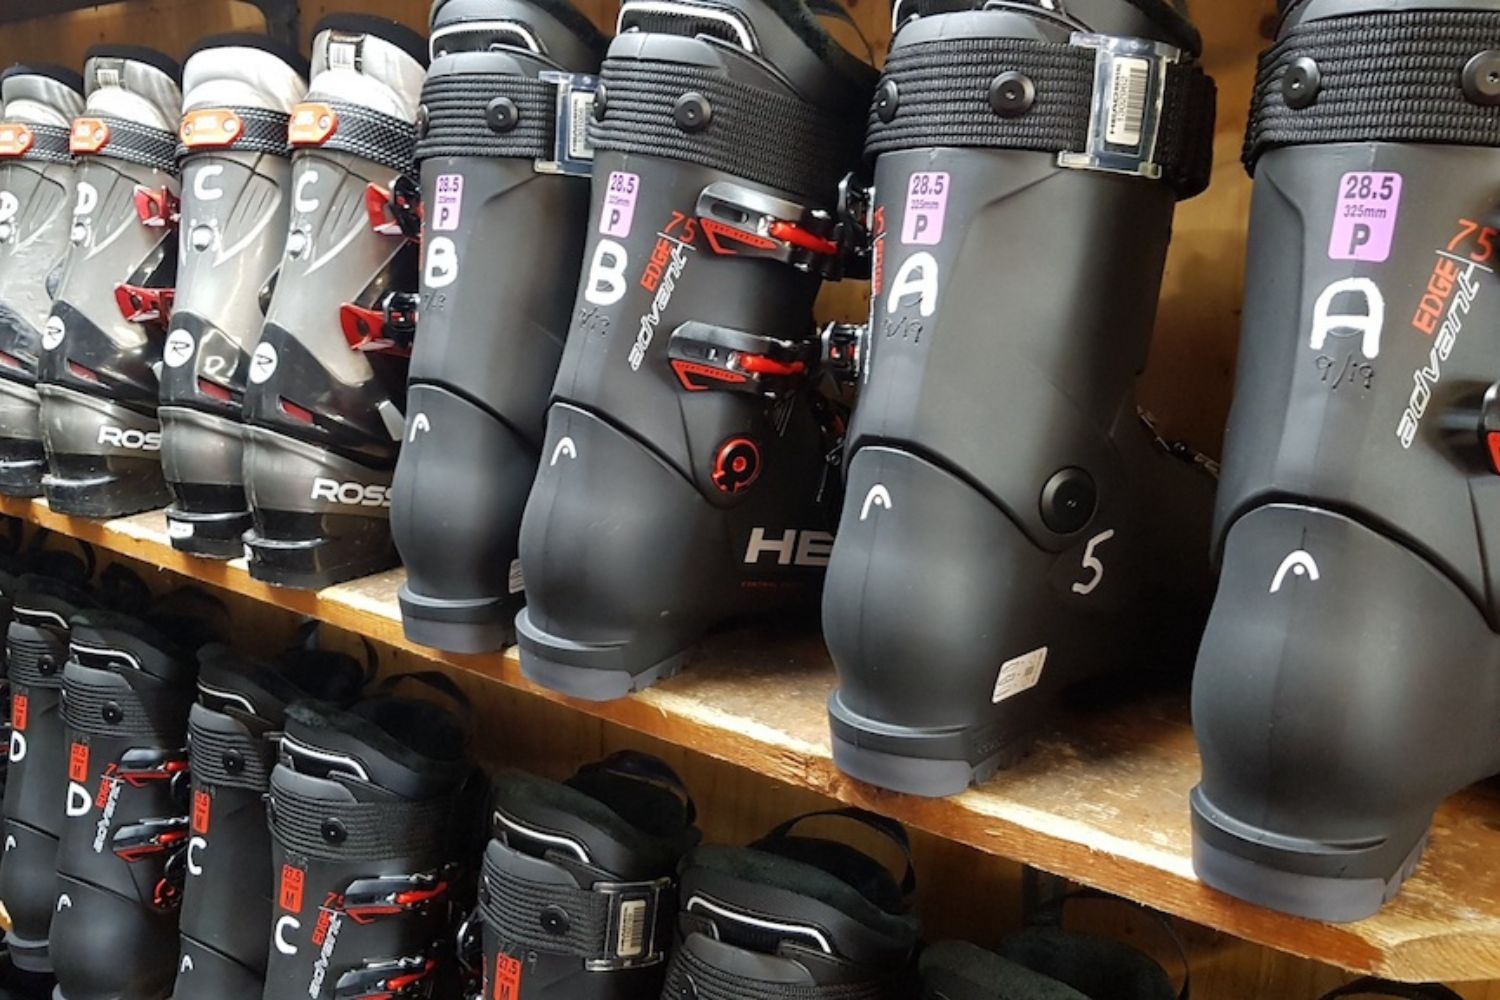 Ski boots to hire for Dry slope skiing, Kendal Snowsports Club